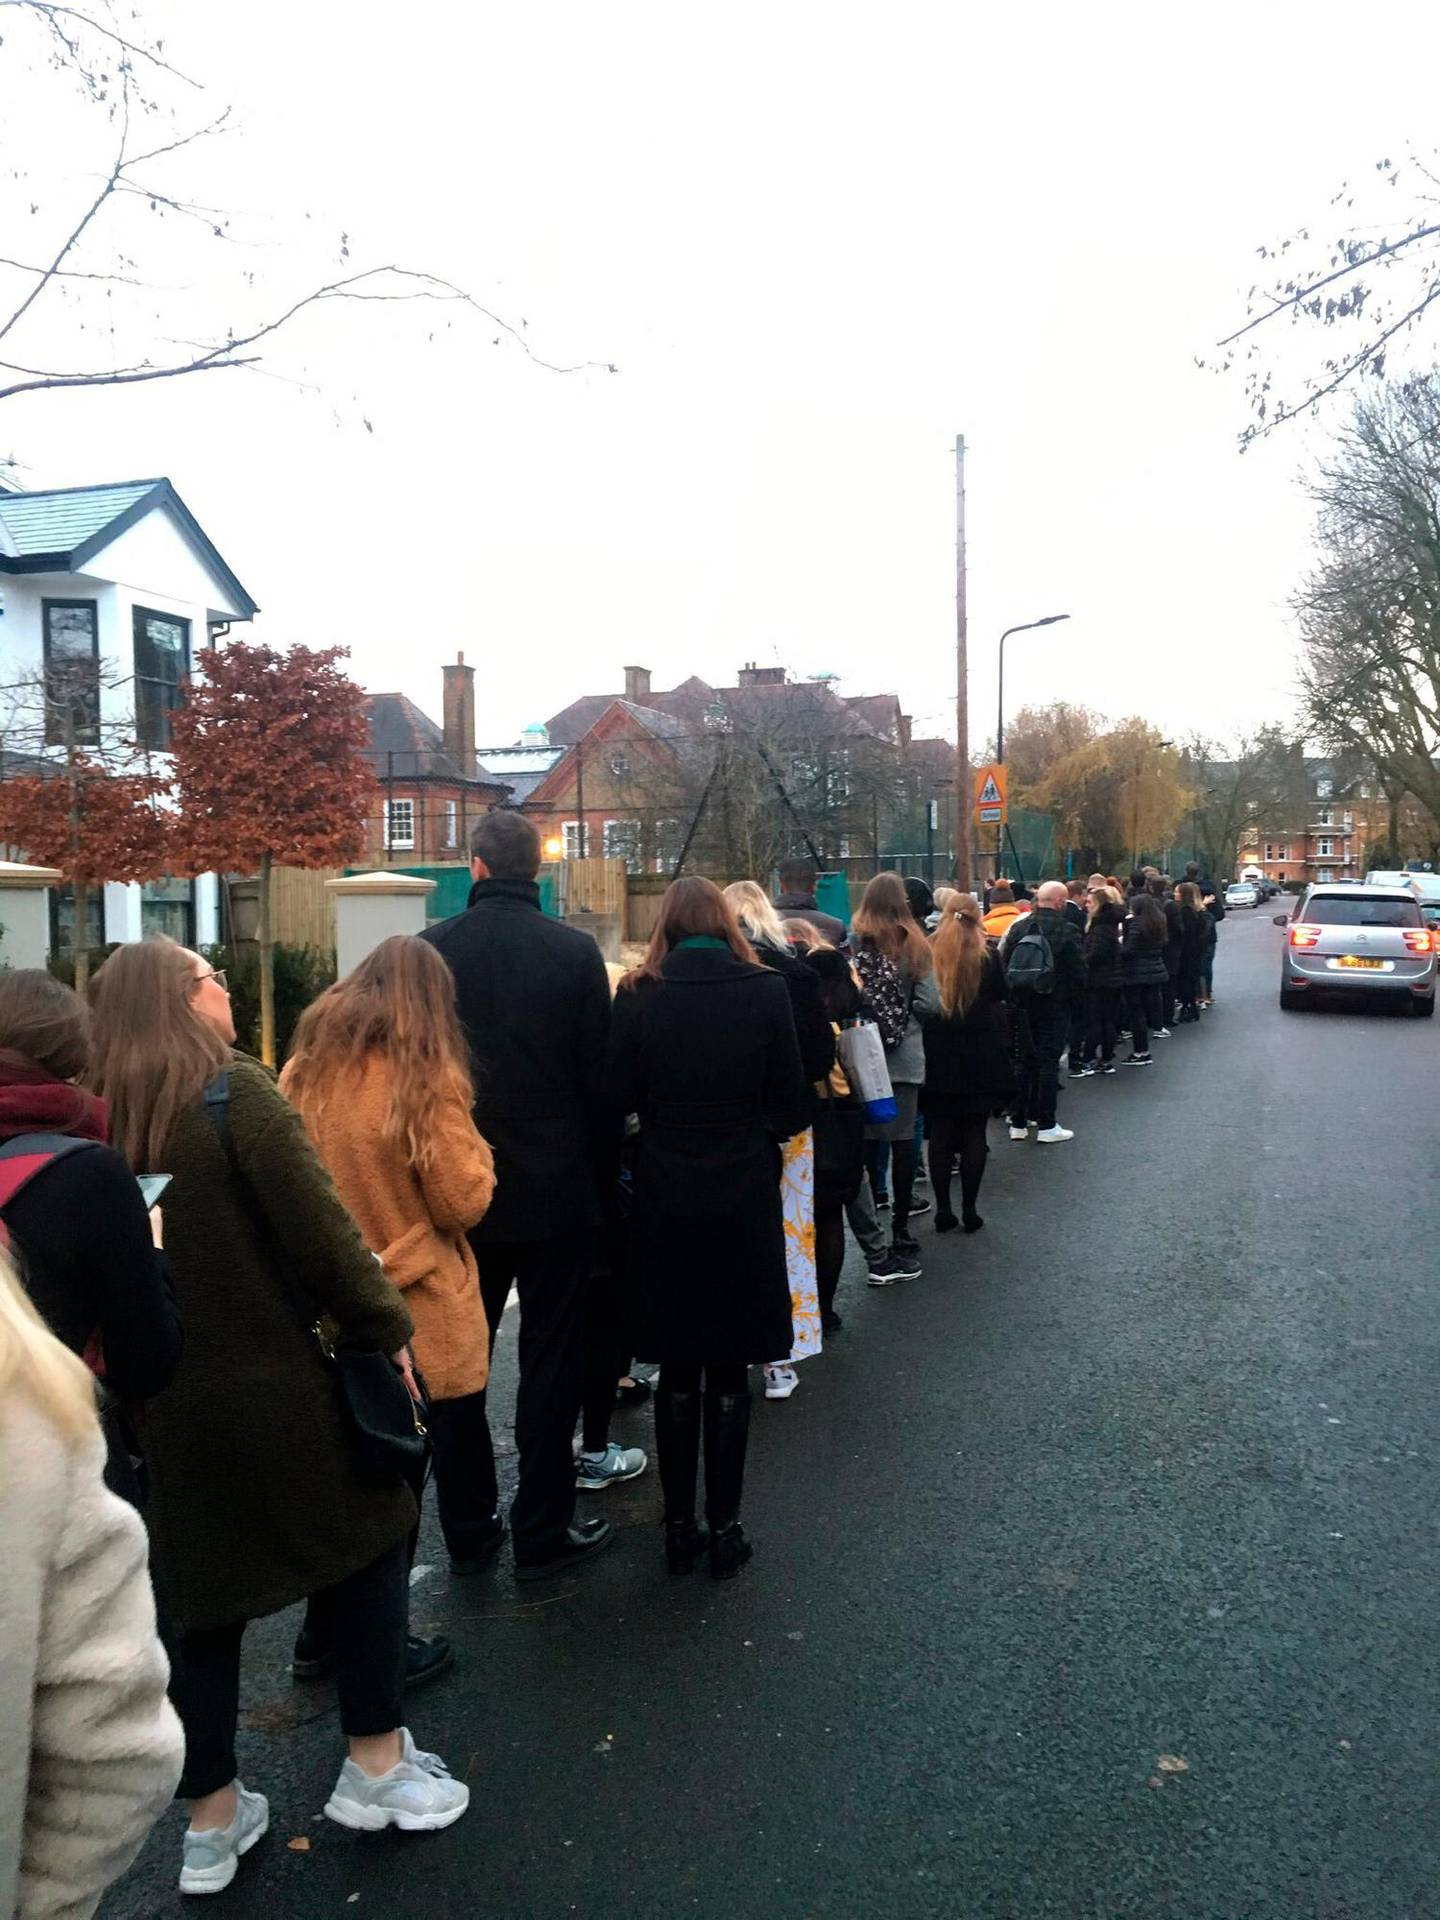 In this photo made available by Kelly Molloy, people queue to cast their ballots, at polling station, during the general election, in Clapham, London, Thursday, Dec. 12, 2019. Britain is holding an early election in wintry December, with a number of strange locations put in use as polling places. Among the places where Britons cast their ballots Tuesday were a car dealership, a laundrette, a Christmas grotto and of course some pubs. There were a few problems, including flooding at one location. (Kelly Molloy via AP)